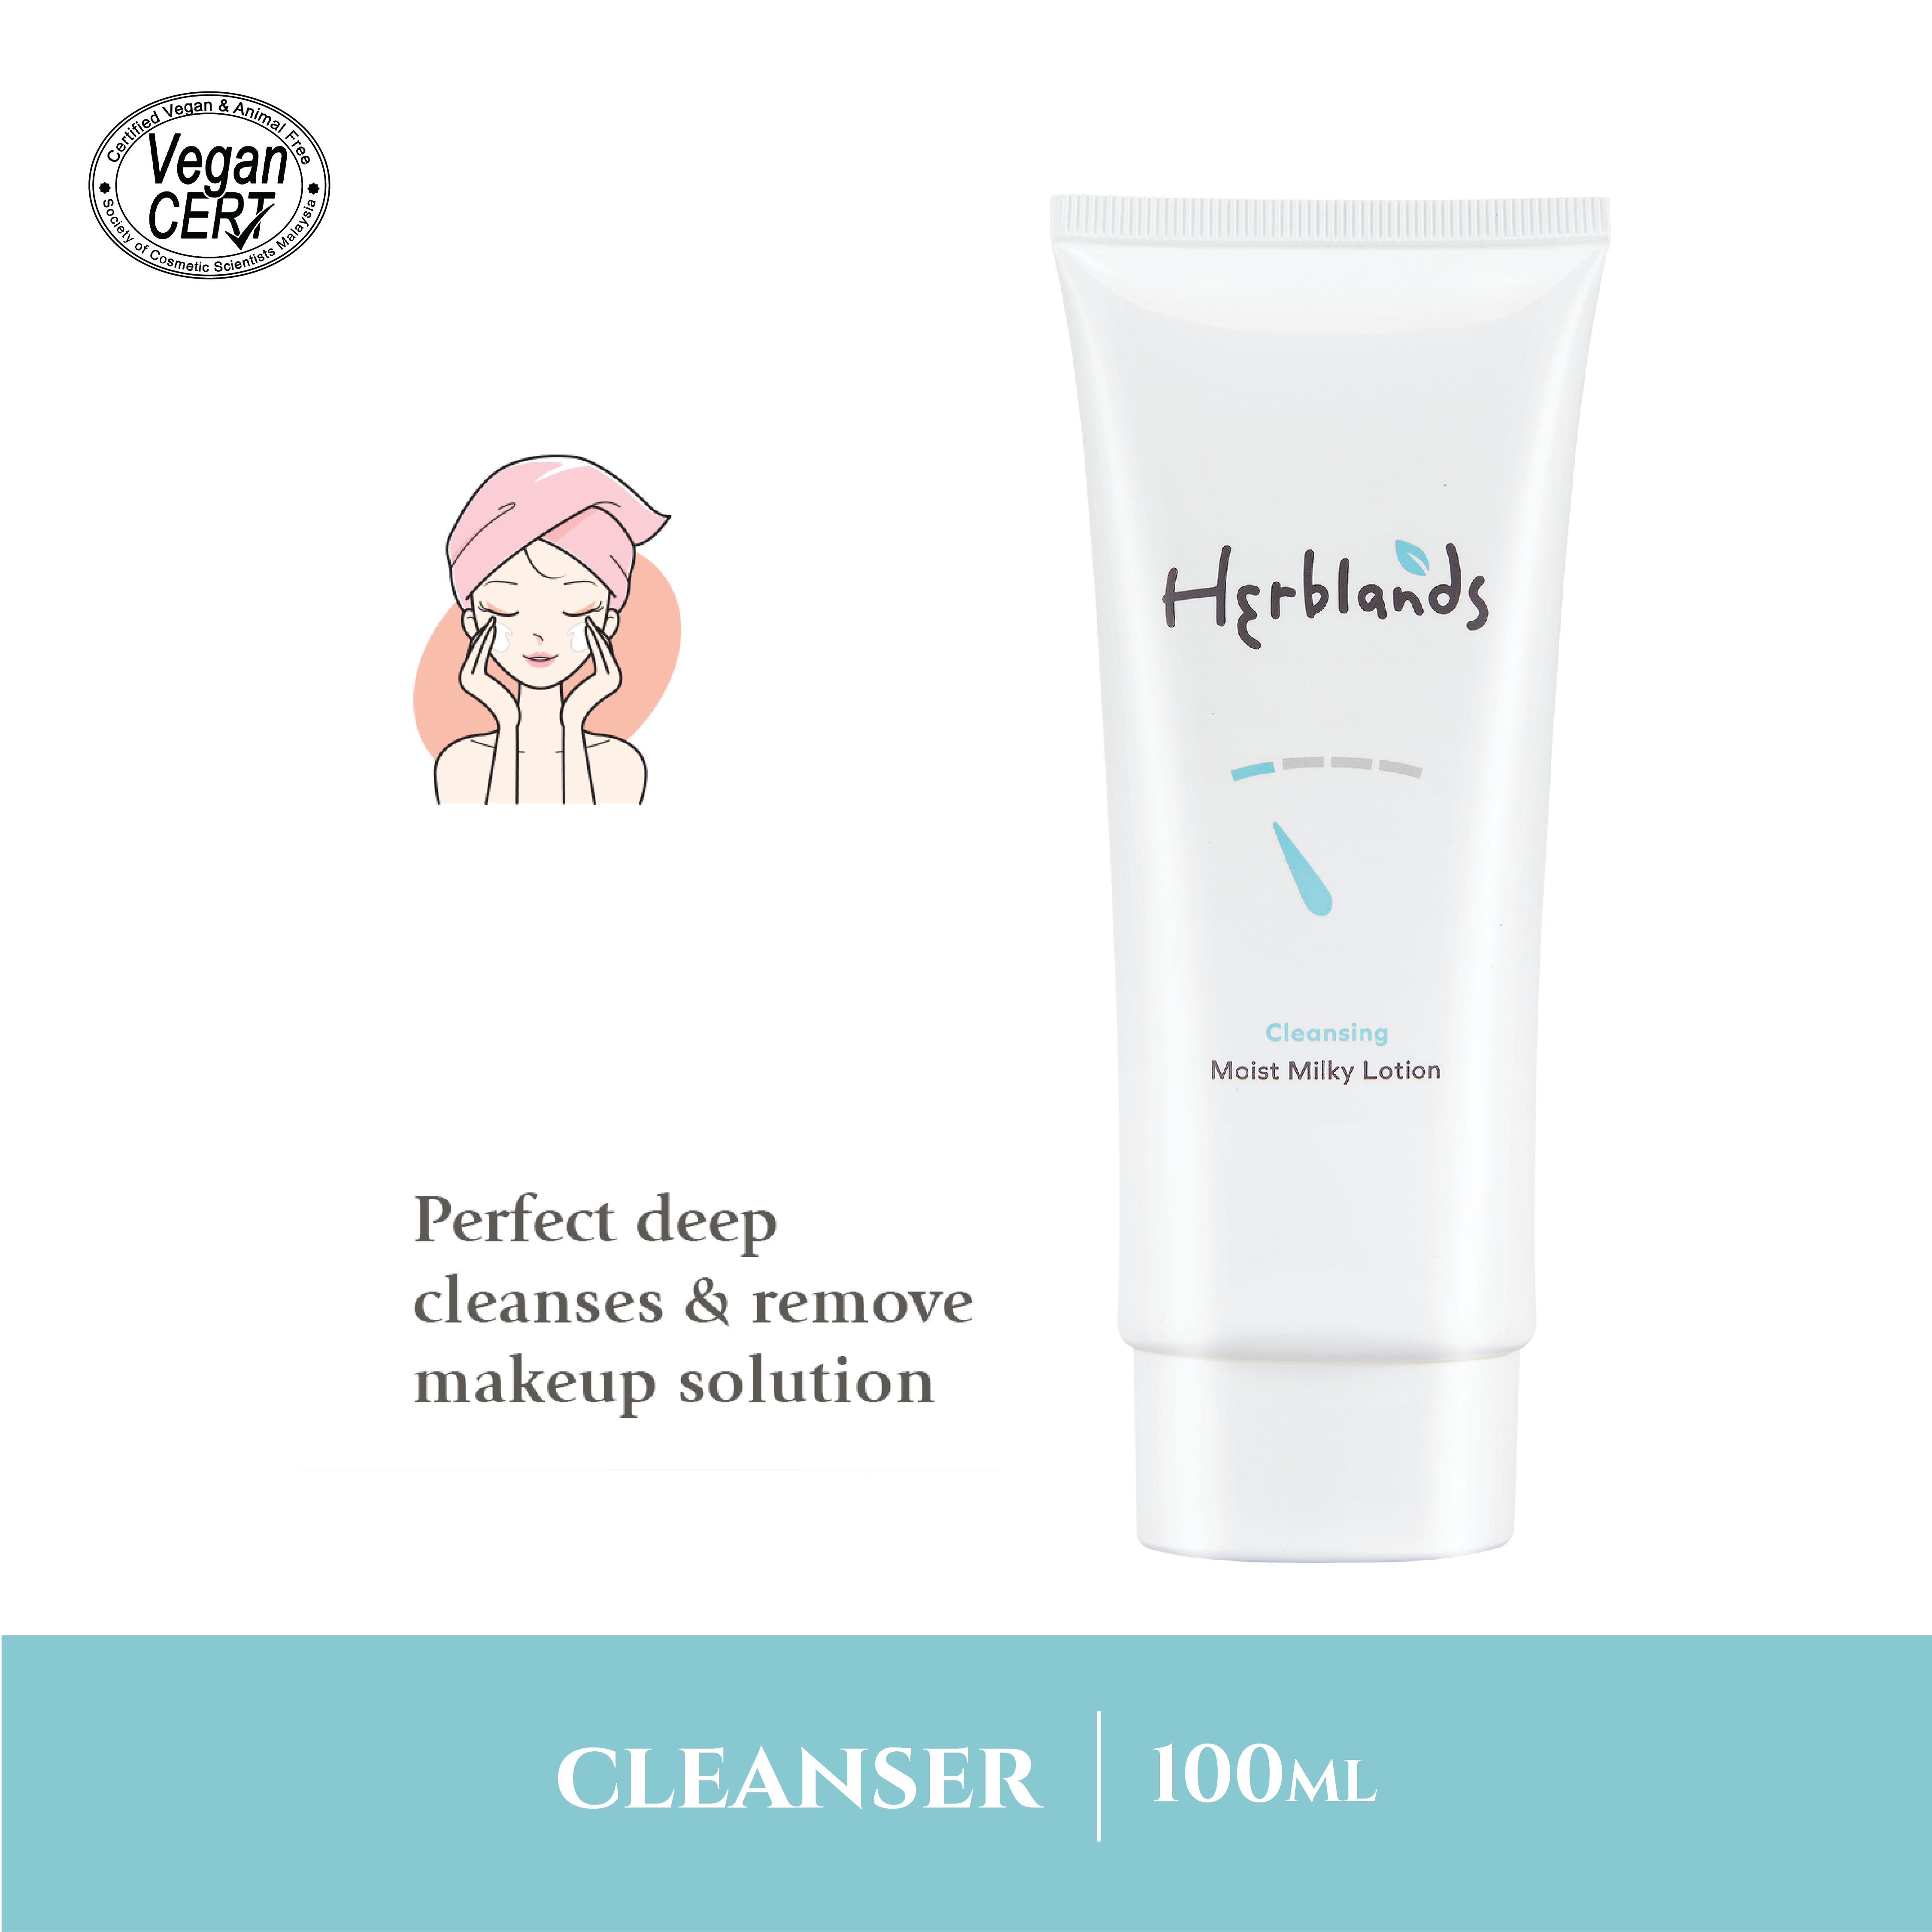 Herblands Cleansing Moist Milky Lotion